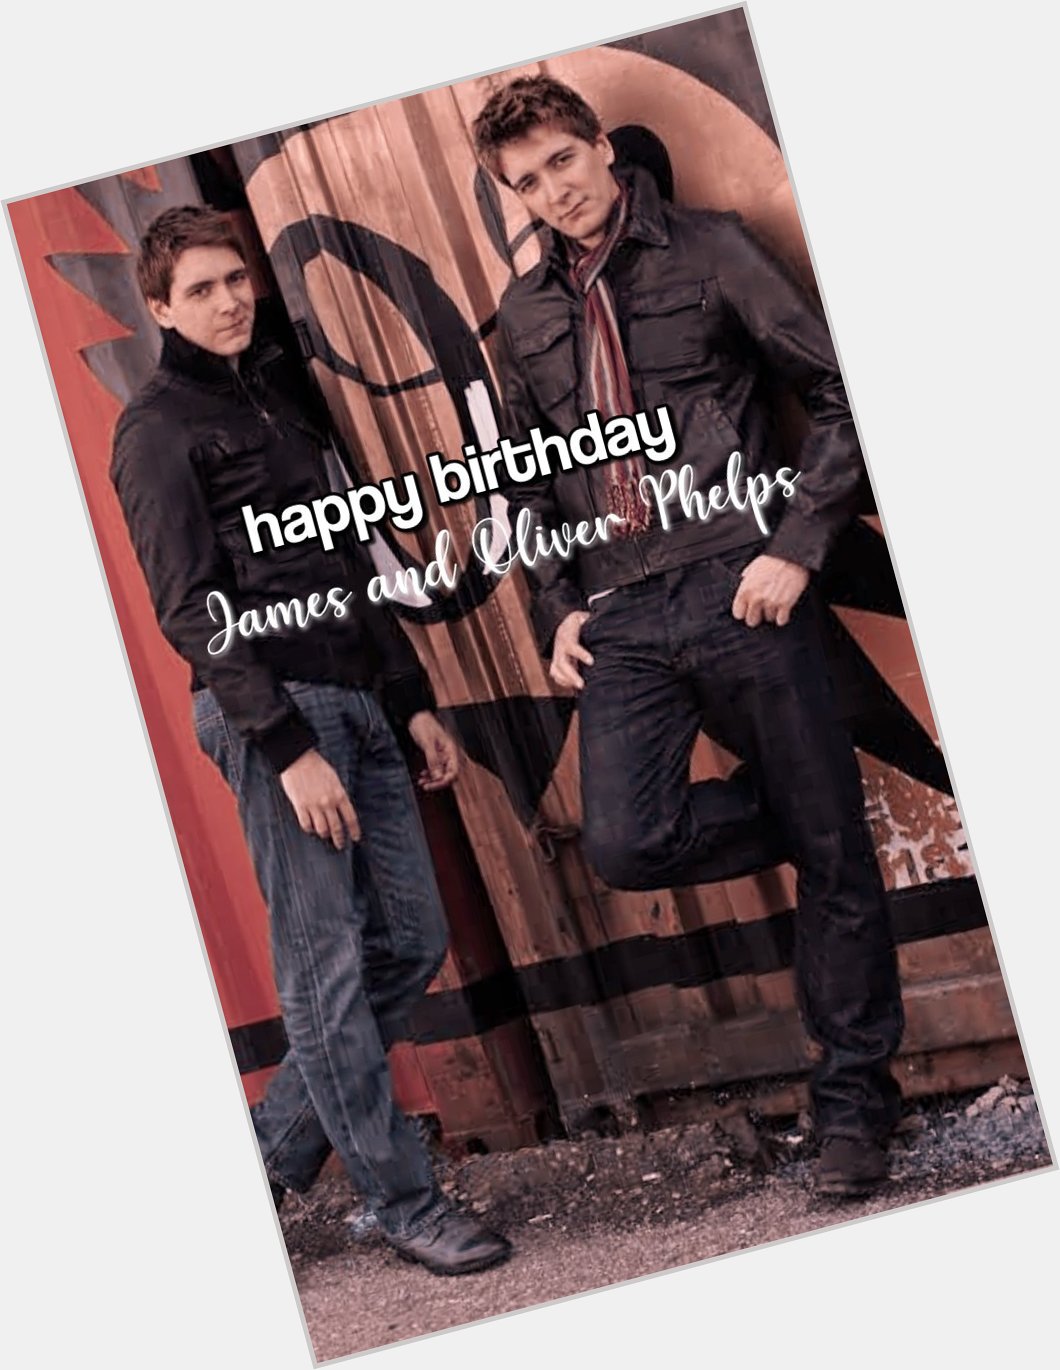 Sorry I\m late! I just made this account. Happy Birthday James & Oliver Phelps  